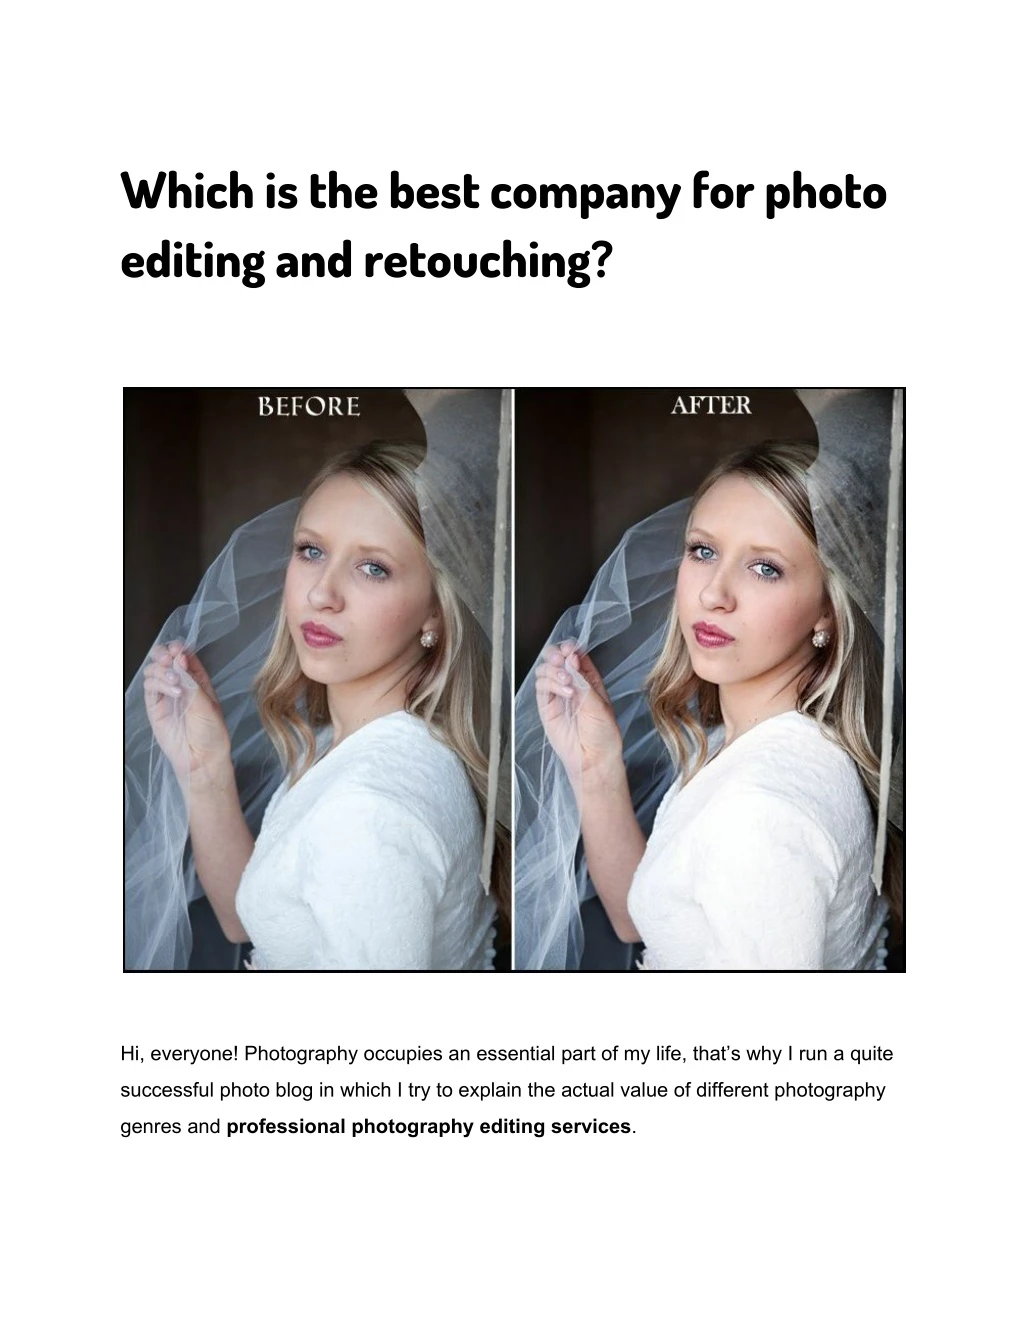 which is the best company for photo editing